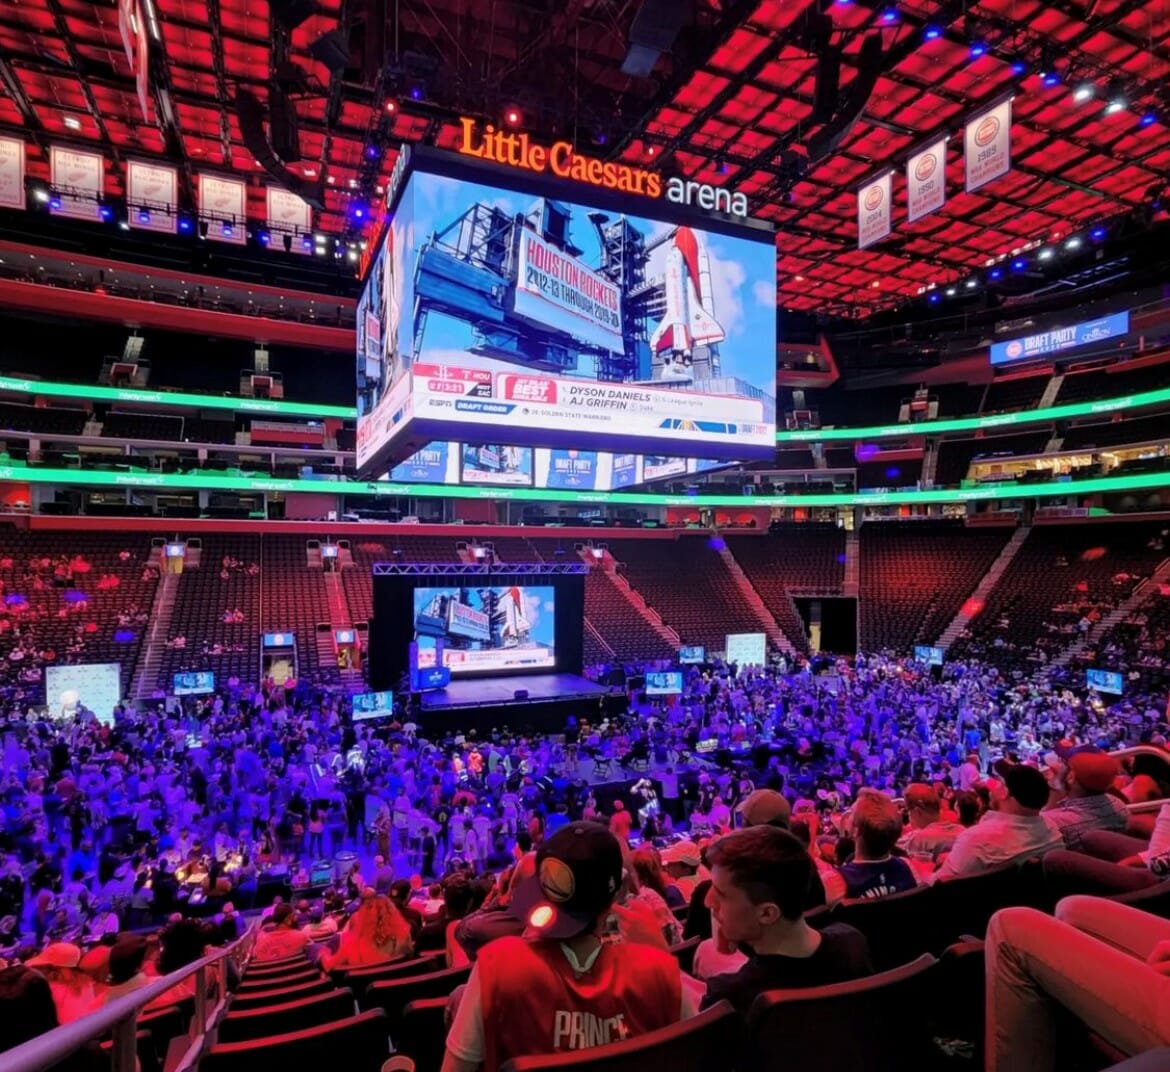 The Detroit Pistons Draft Party at Little Caesars Arena